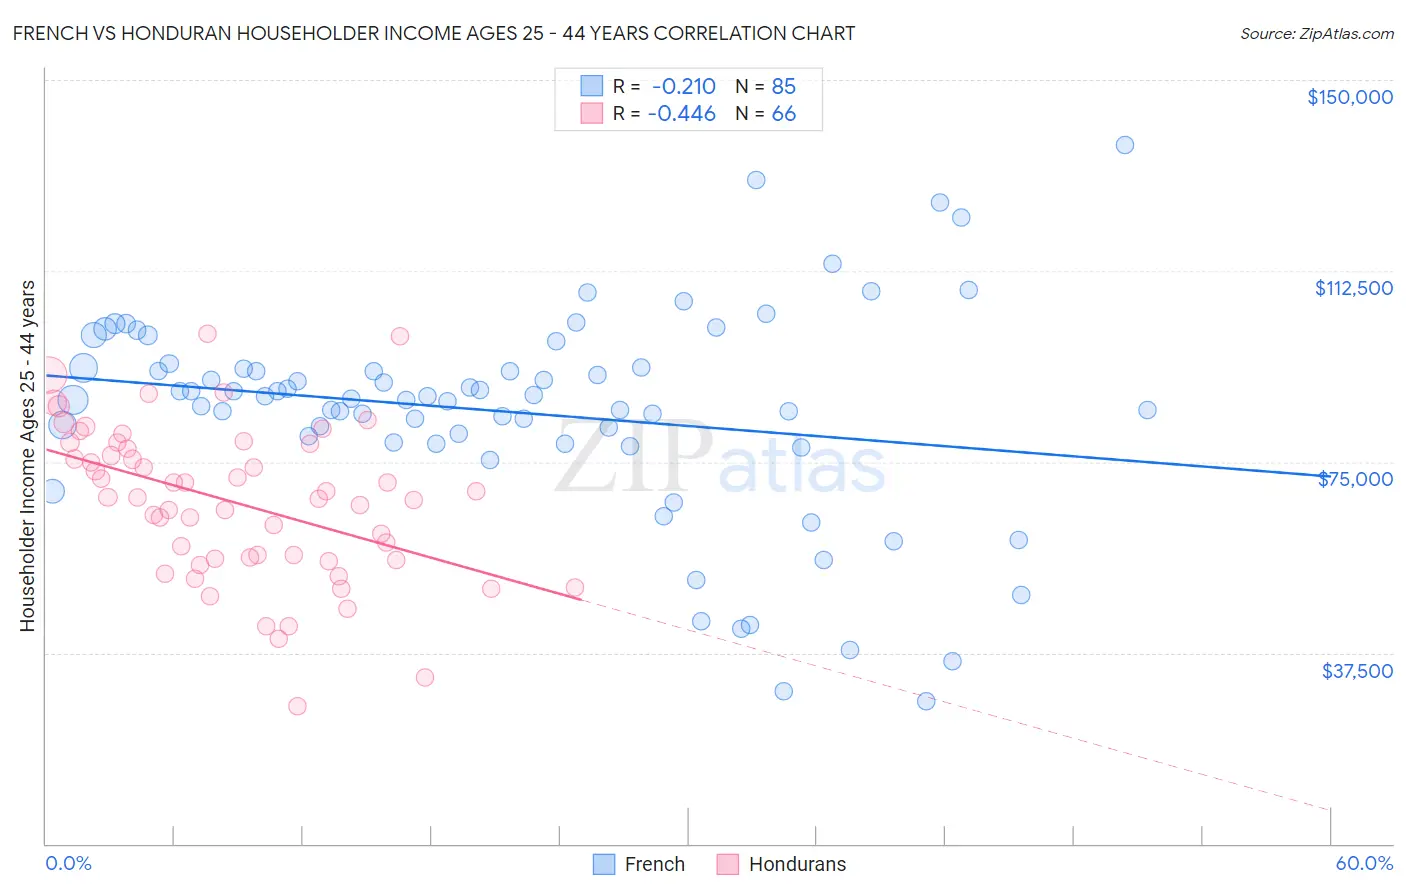 French vs Honduran Householder Income Ages 25 - 44 years